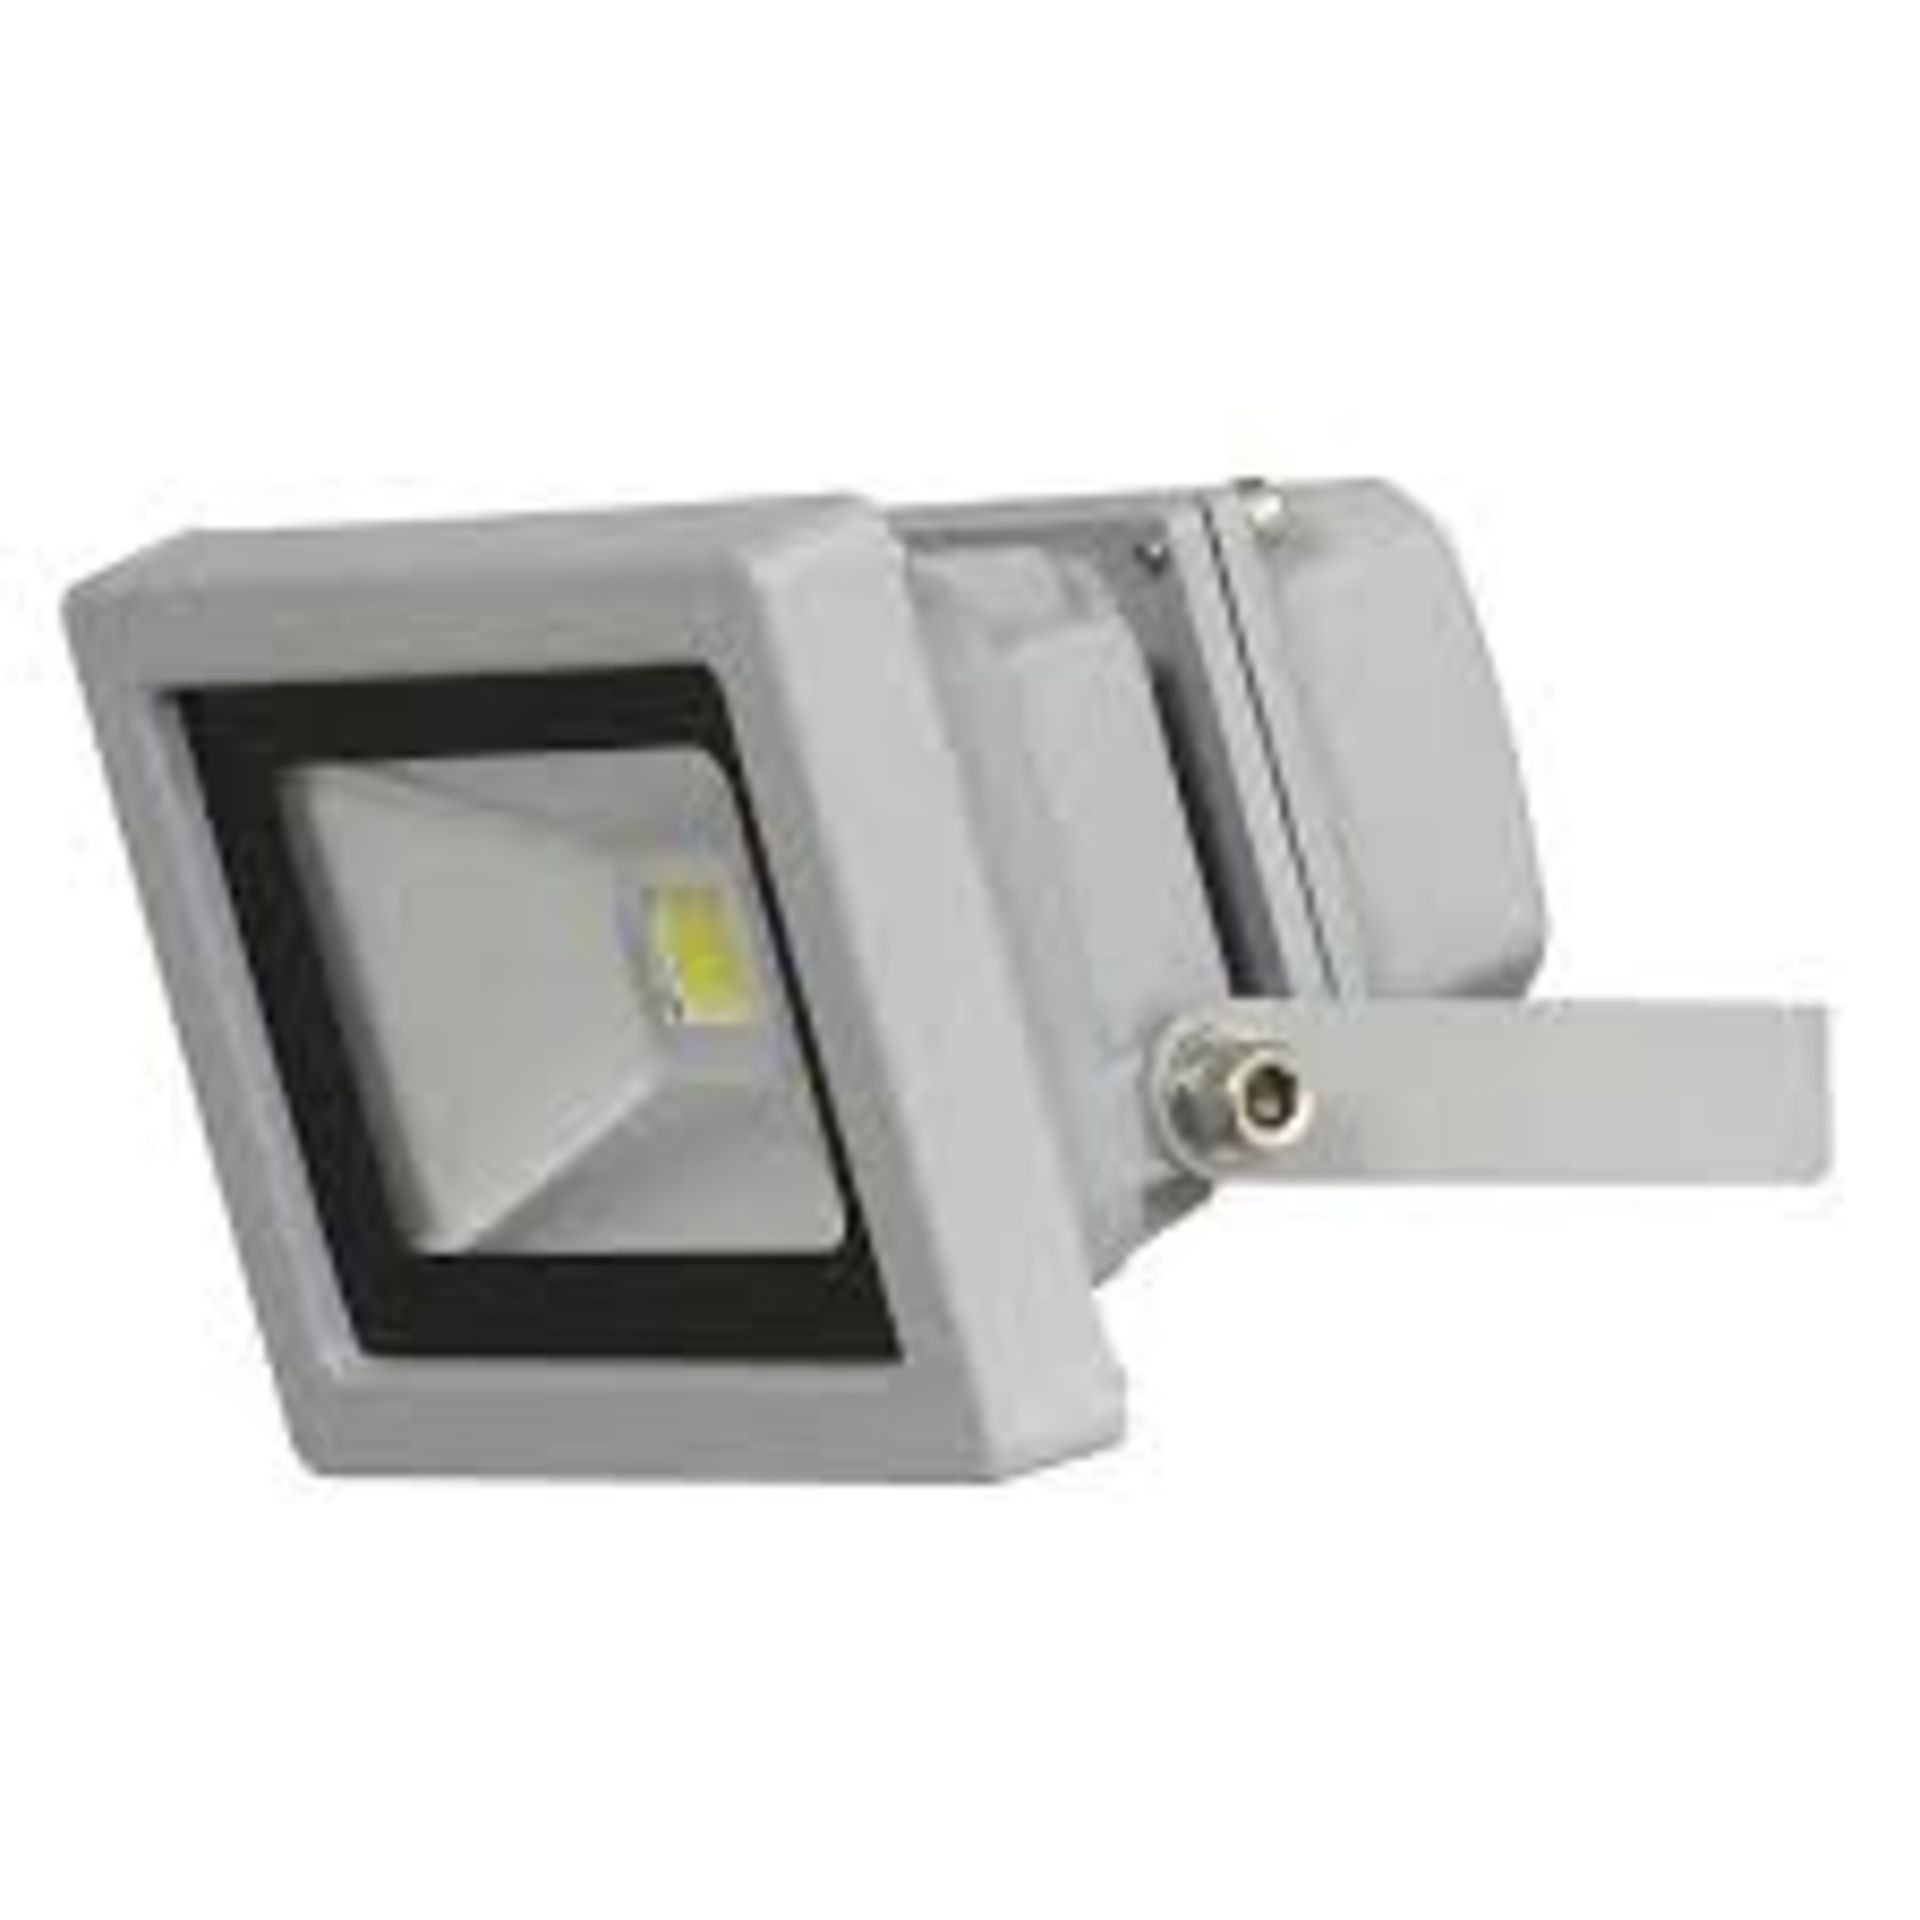 10 X XQ-LITE MAINS POWERED COOL WHITE LED FLOODLIGHTS RRP £21 EACH R3.4 - Image 2 of 2